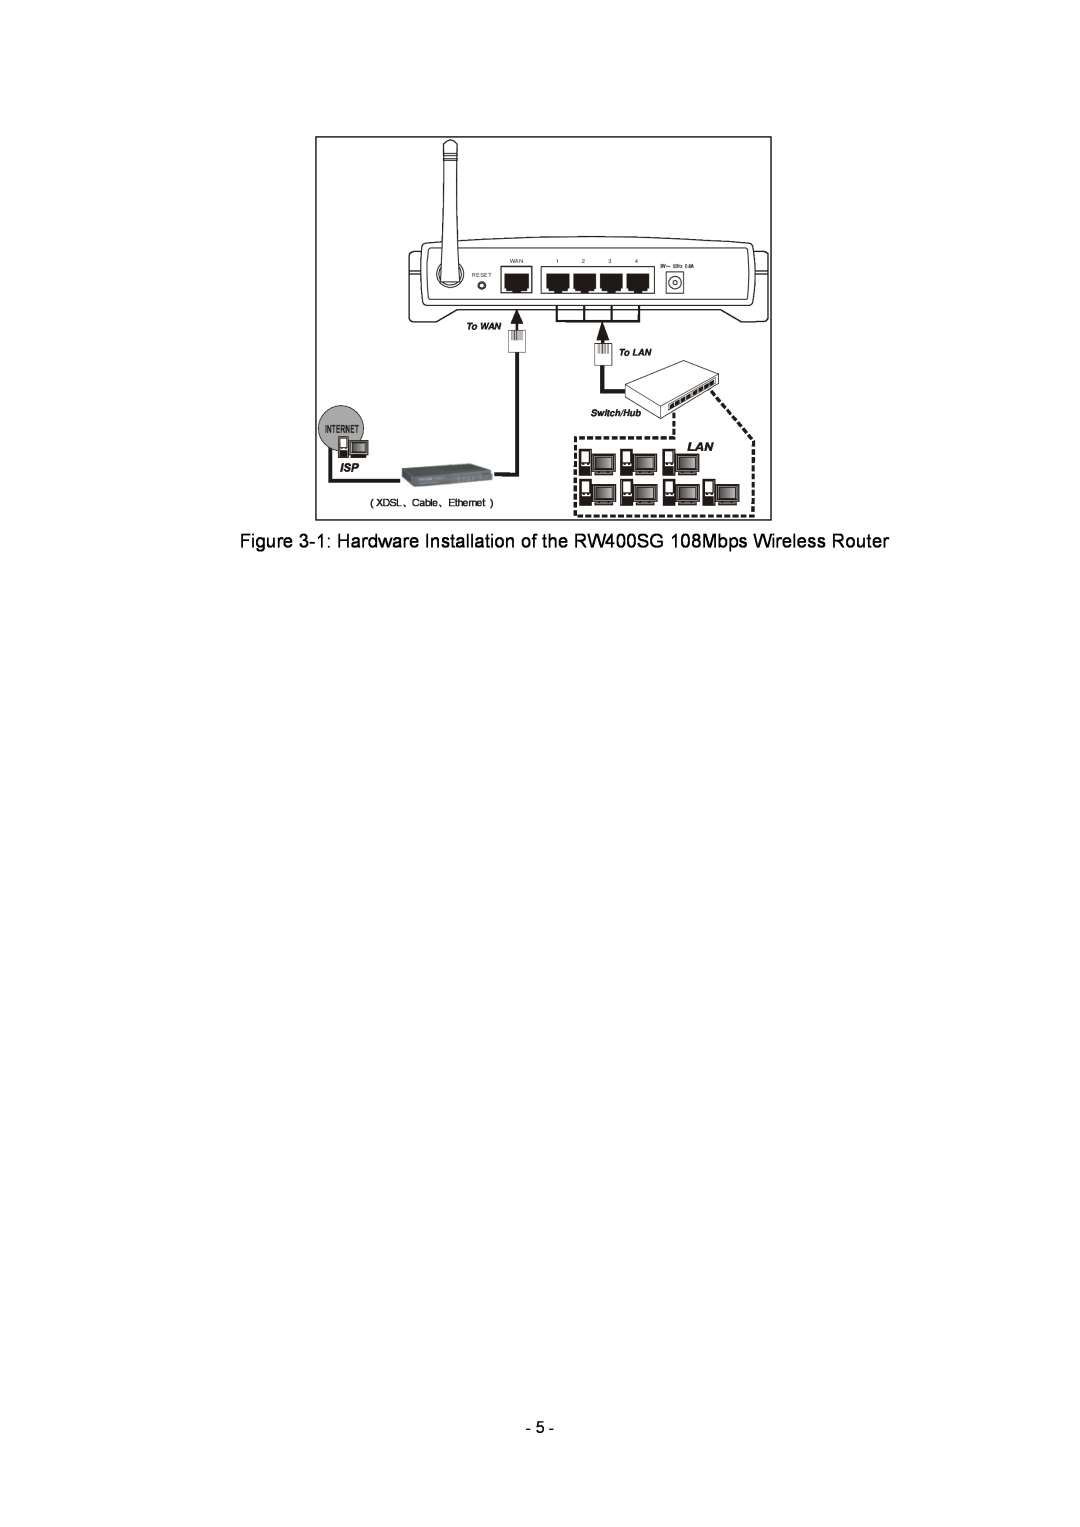 Olitec RW400SG manual （XDSL 、Cable 、Ethernet ）, To LAN, Switch/Hub, To WAN, Reset 